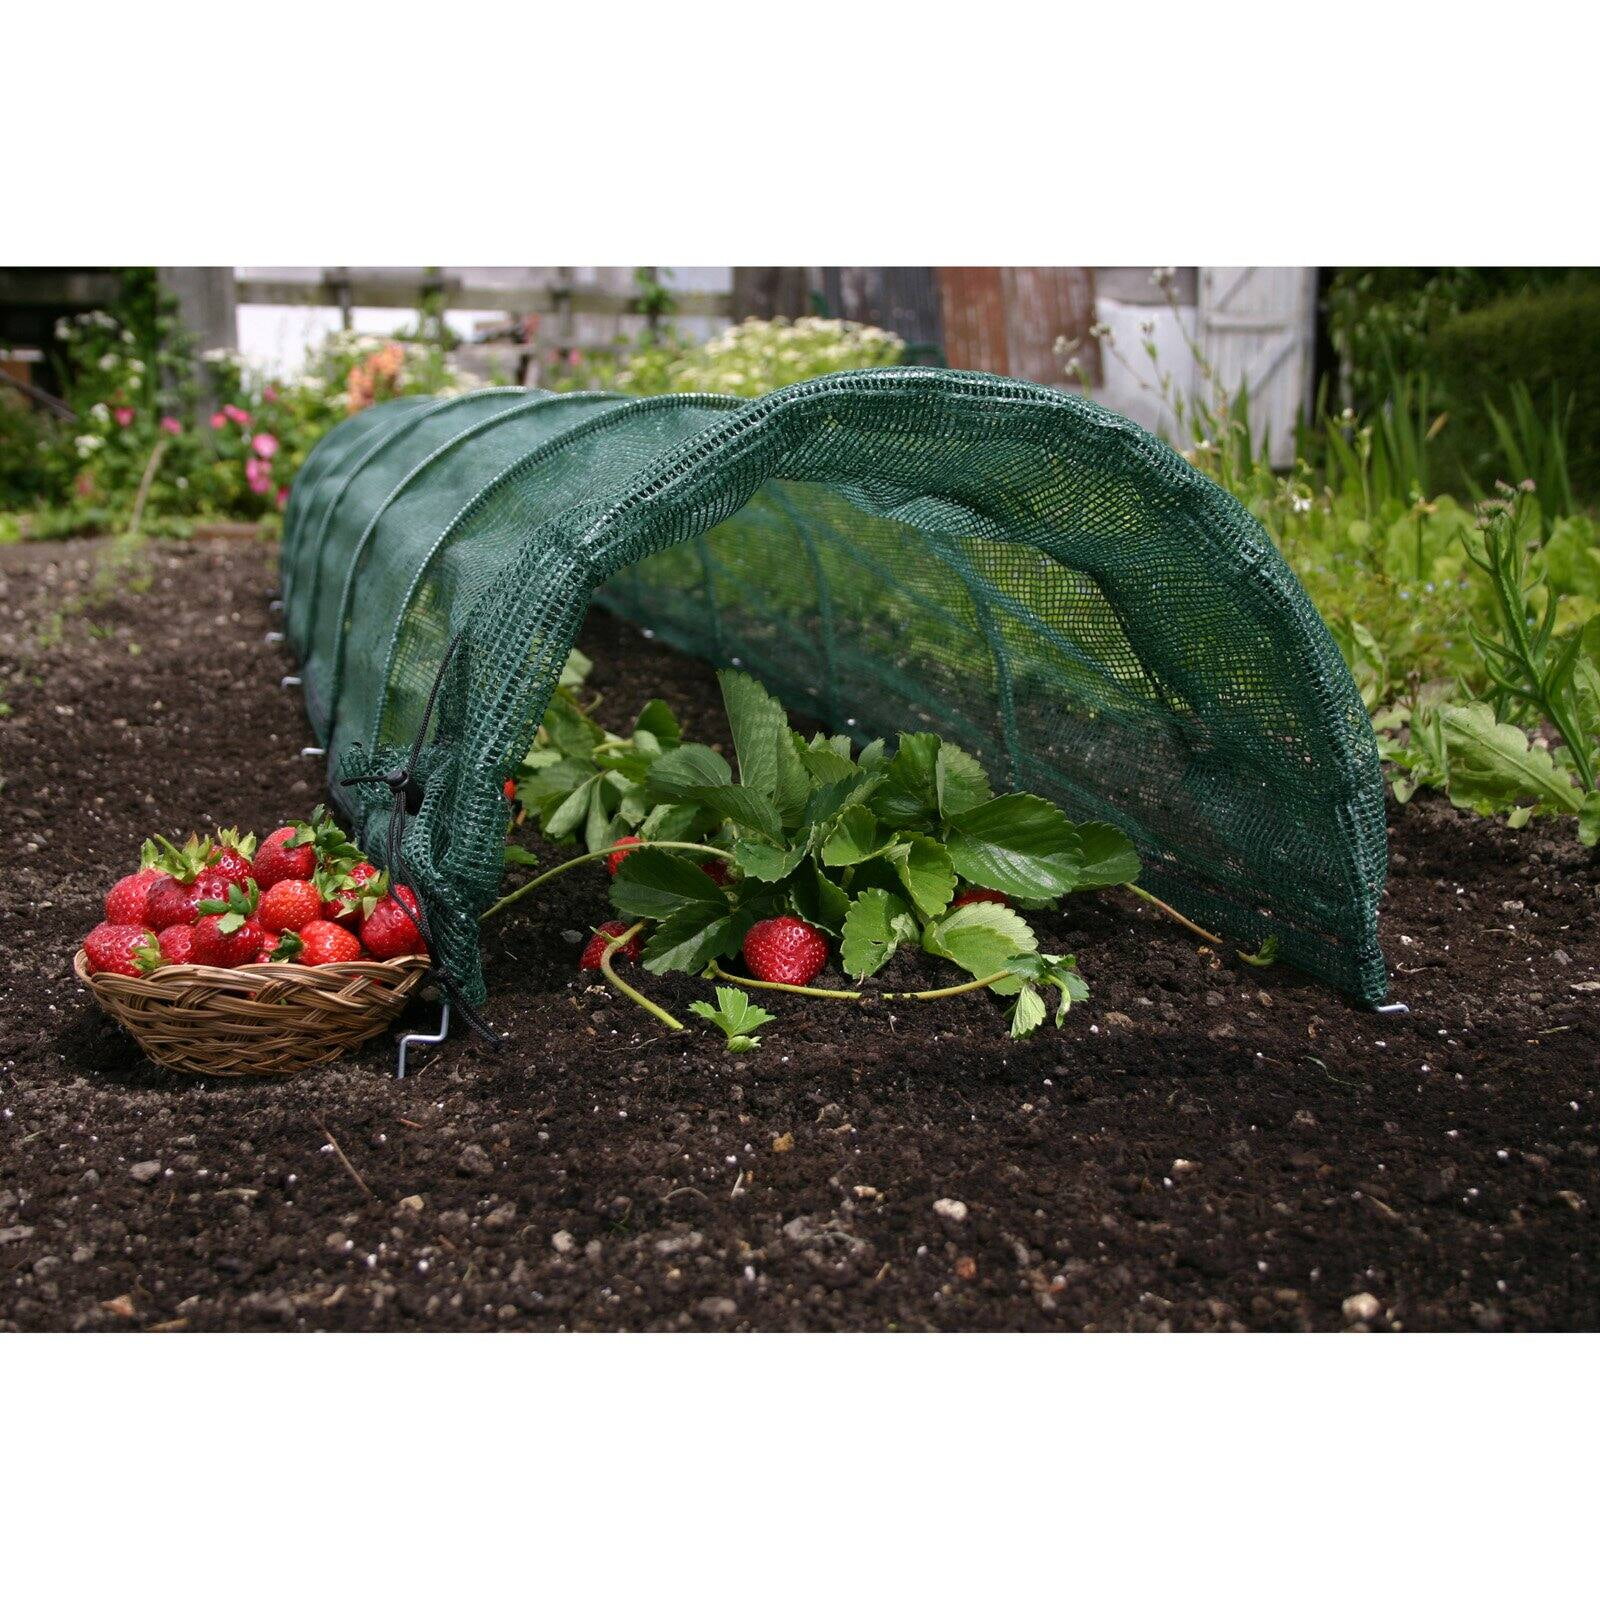 NEW 300x45x45cm Robust Netting NET GROW TUNNEL Suitable for herbs and vegetable 